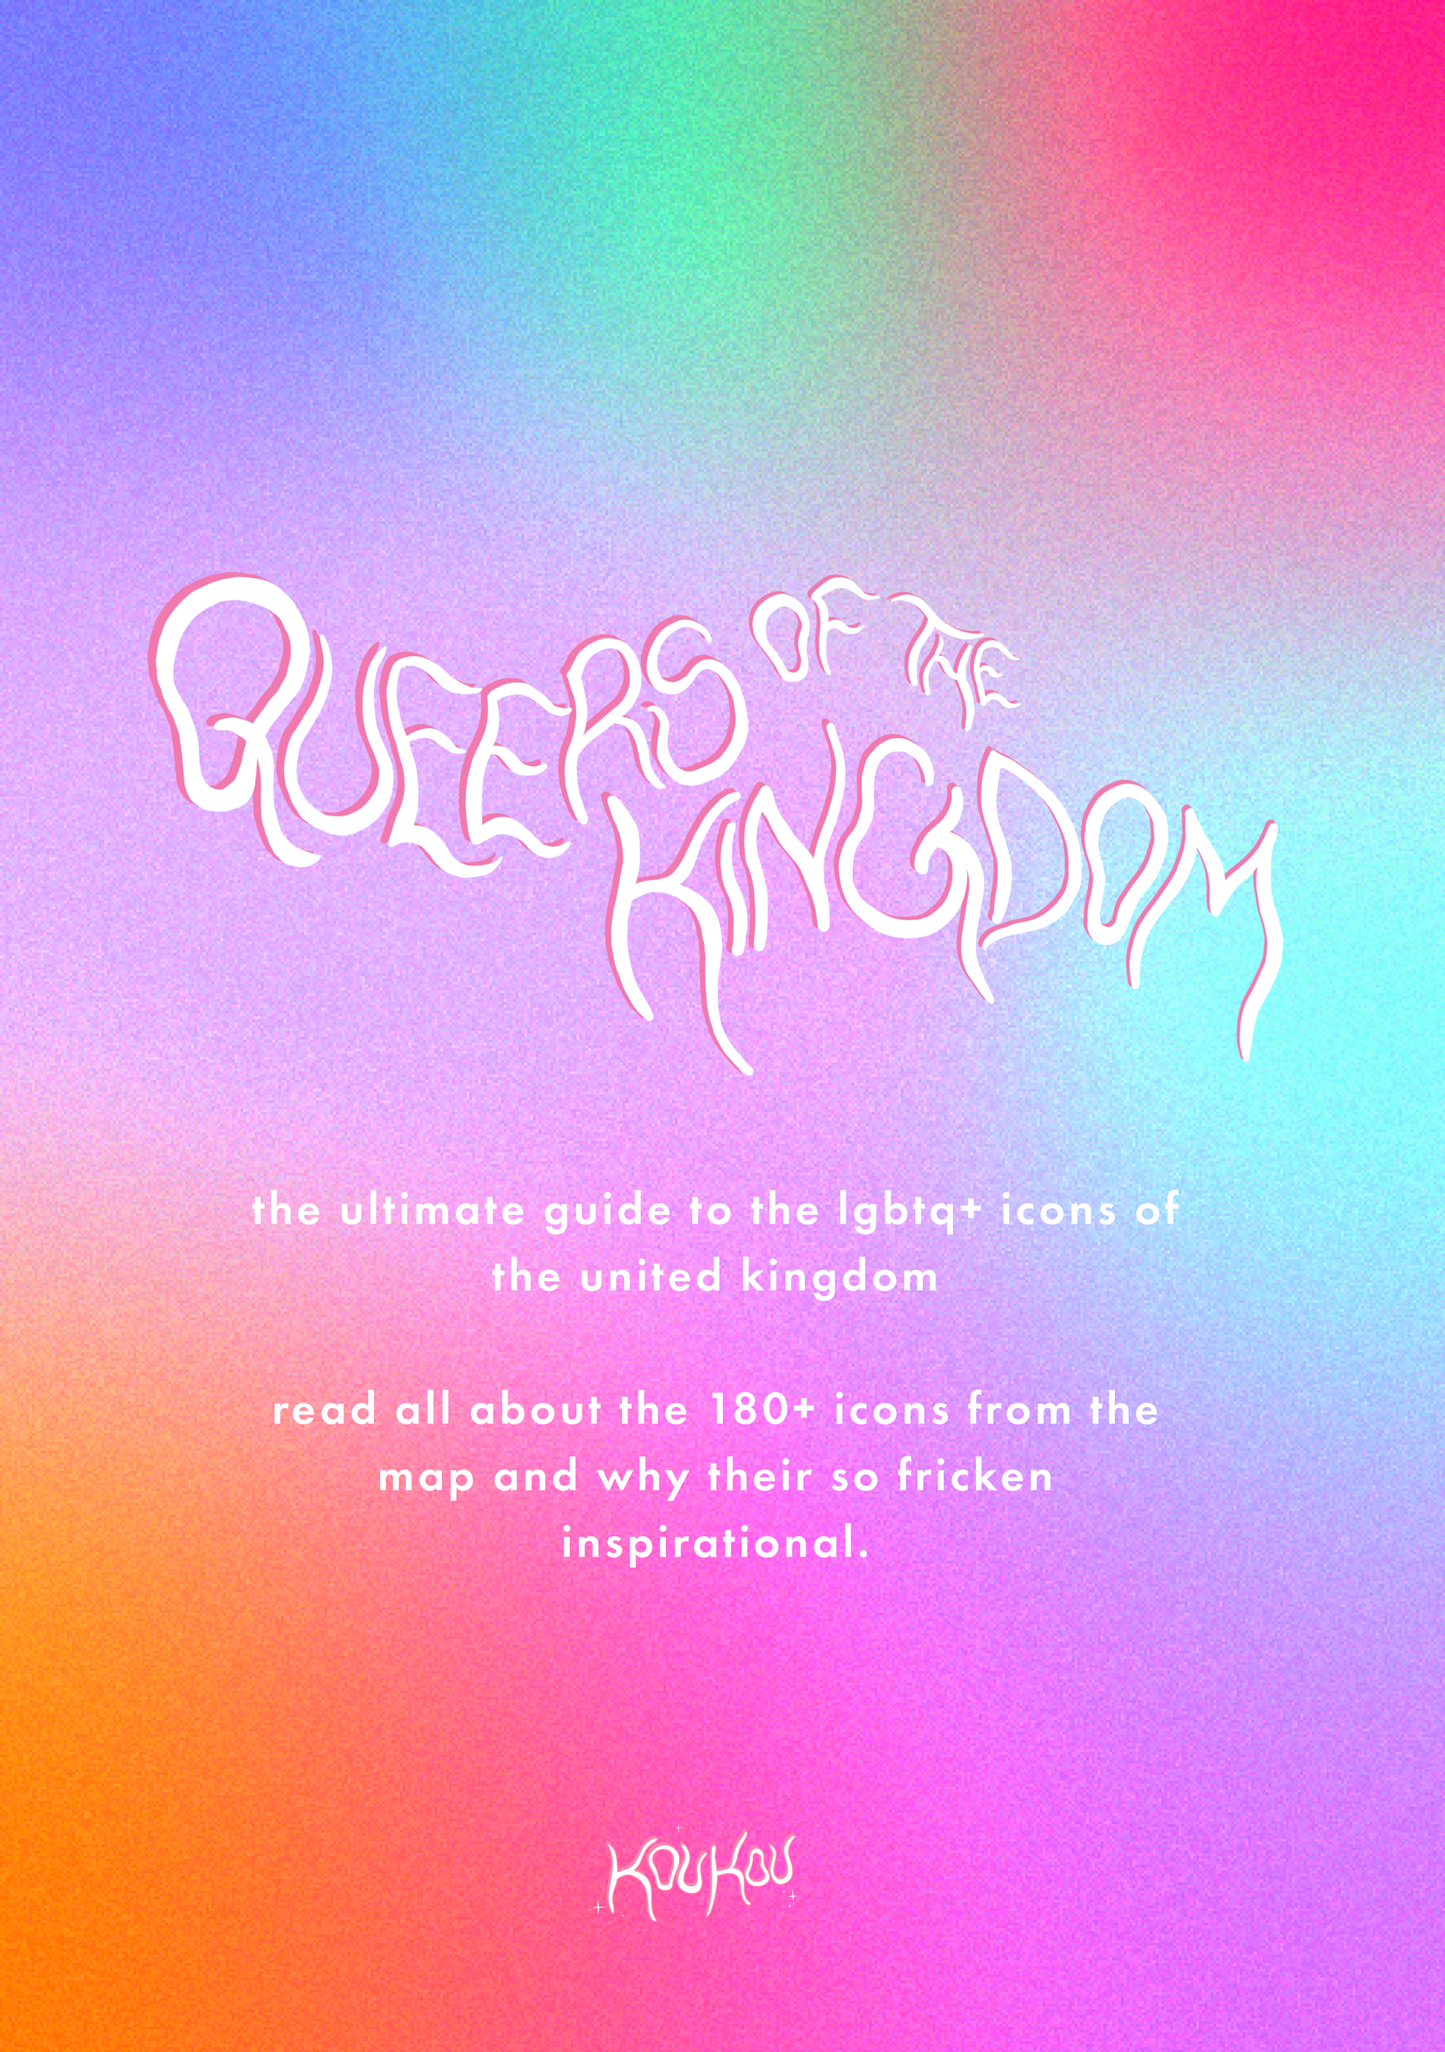 queers of the kingdom booklet